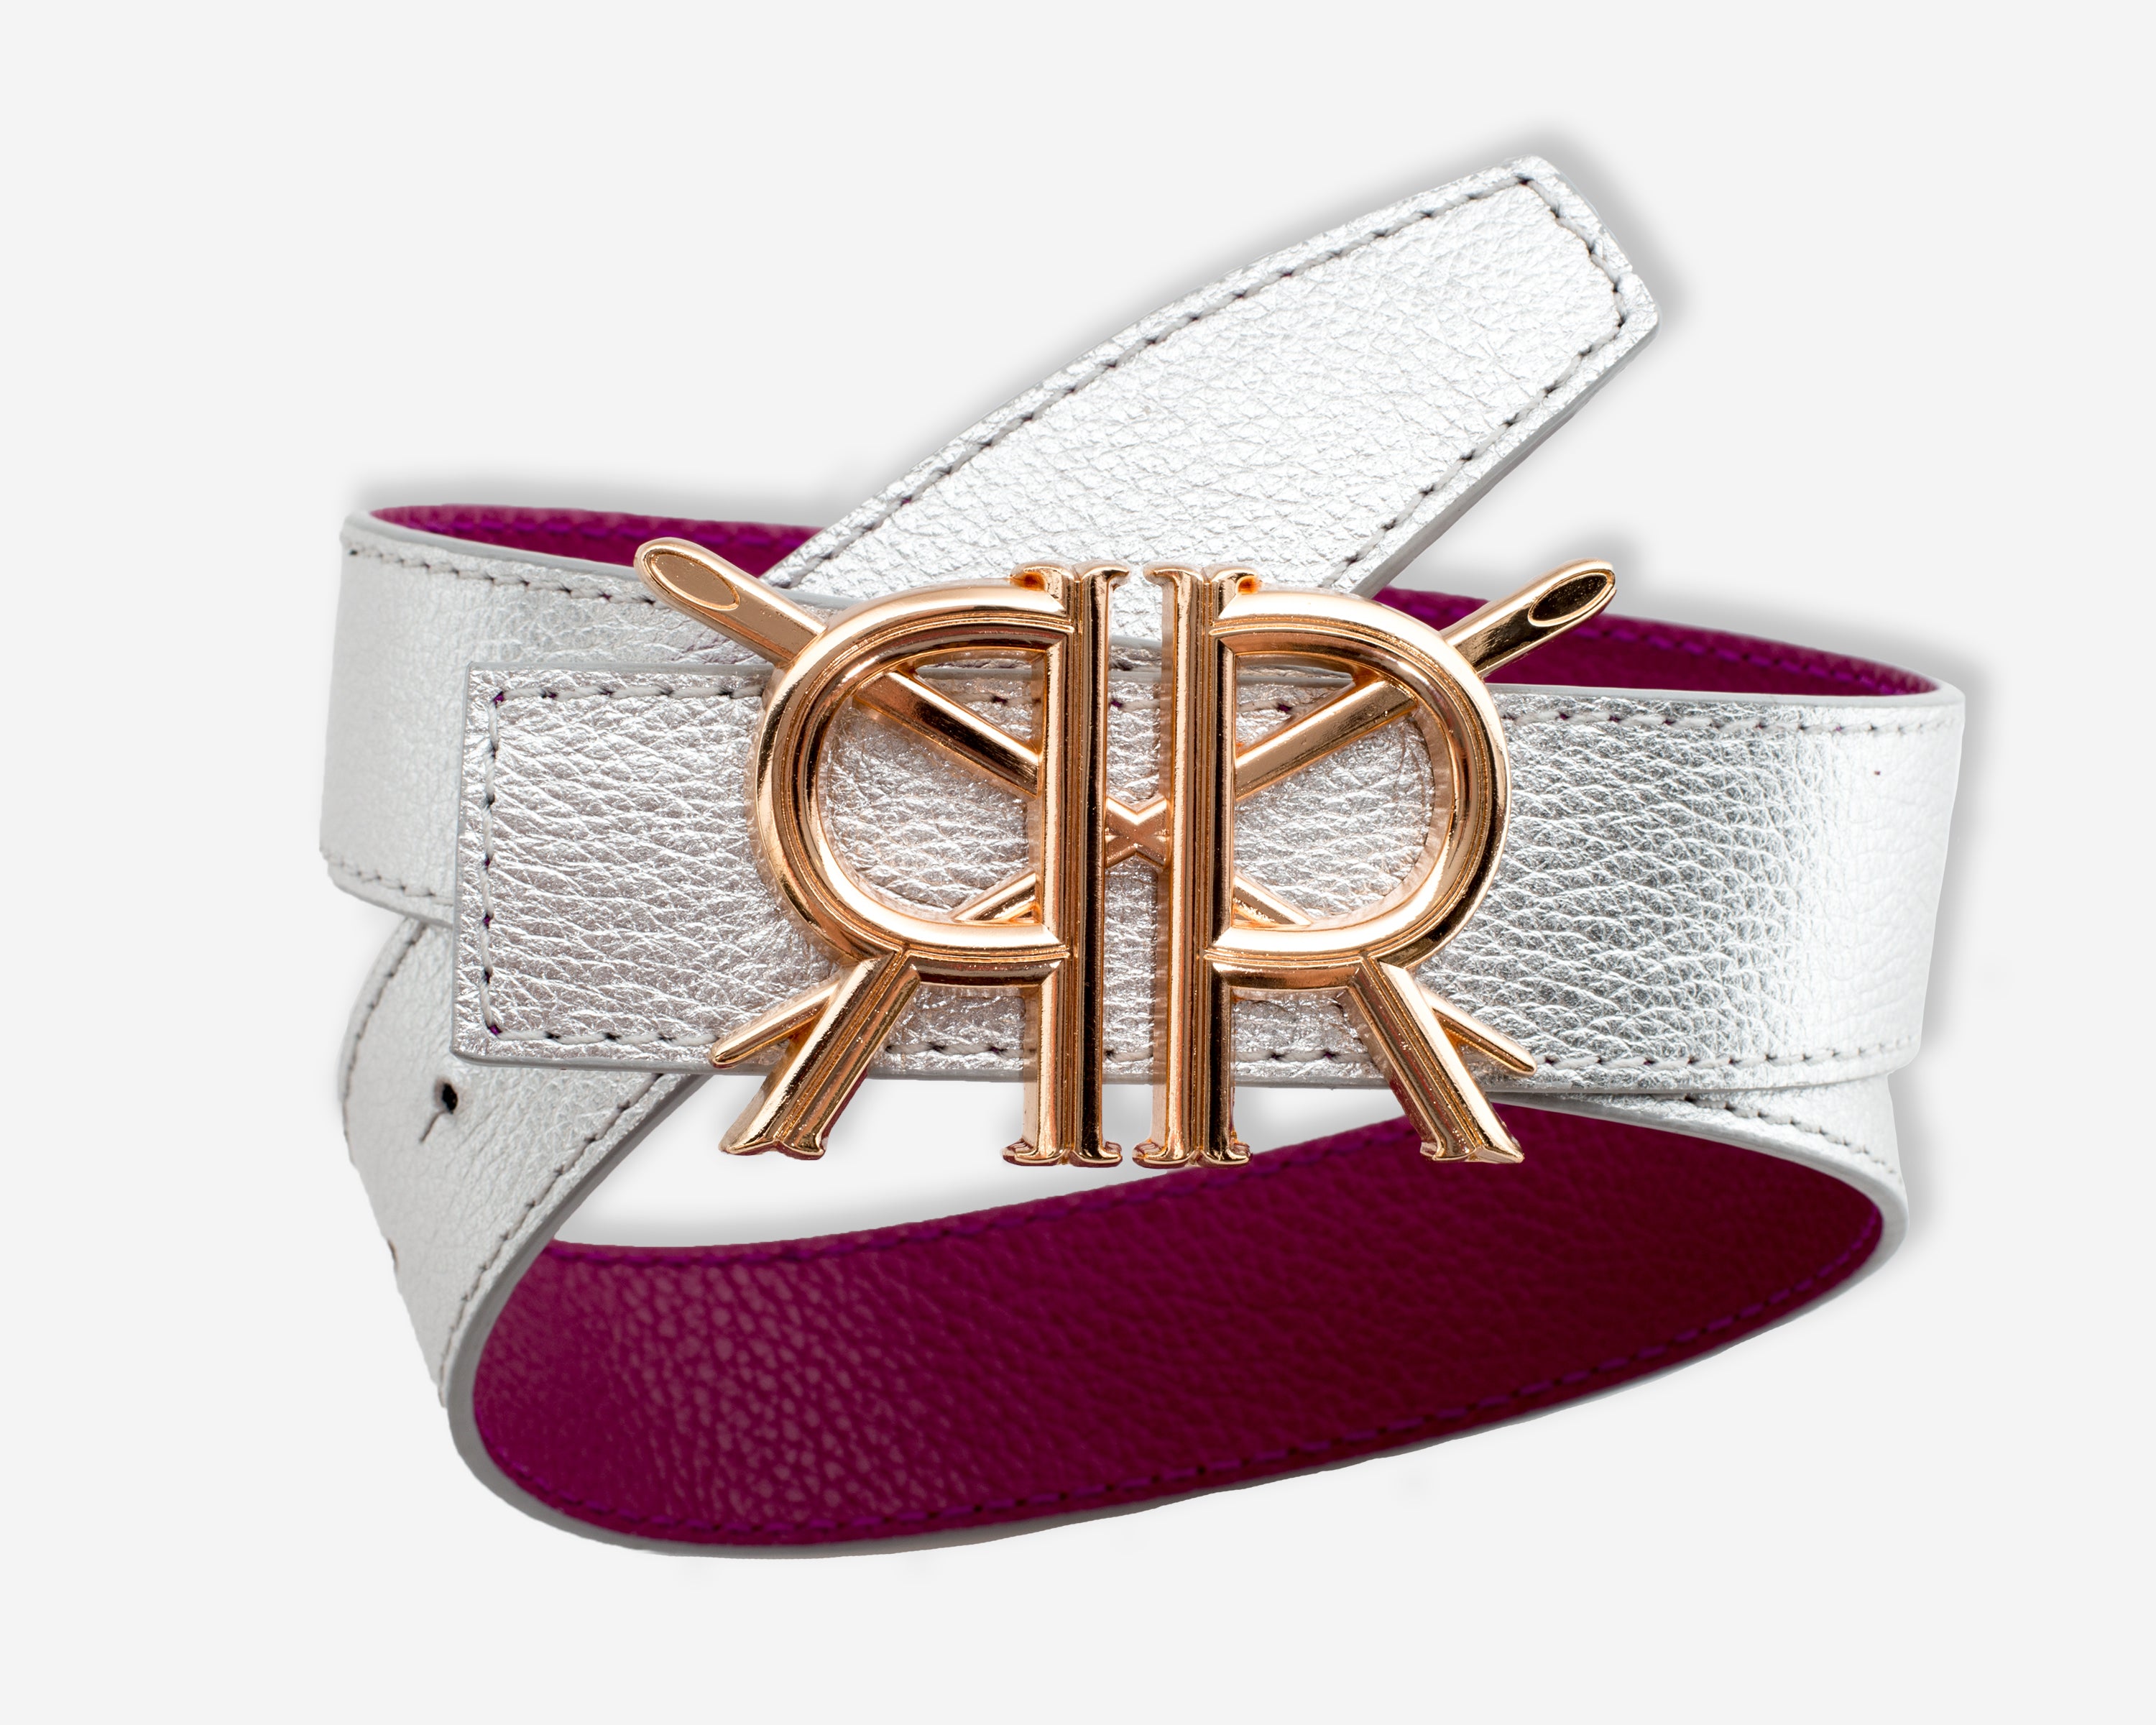 Silver Belt Strap with Buckle – Double R Brand - Dallas